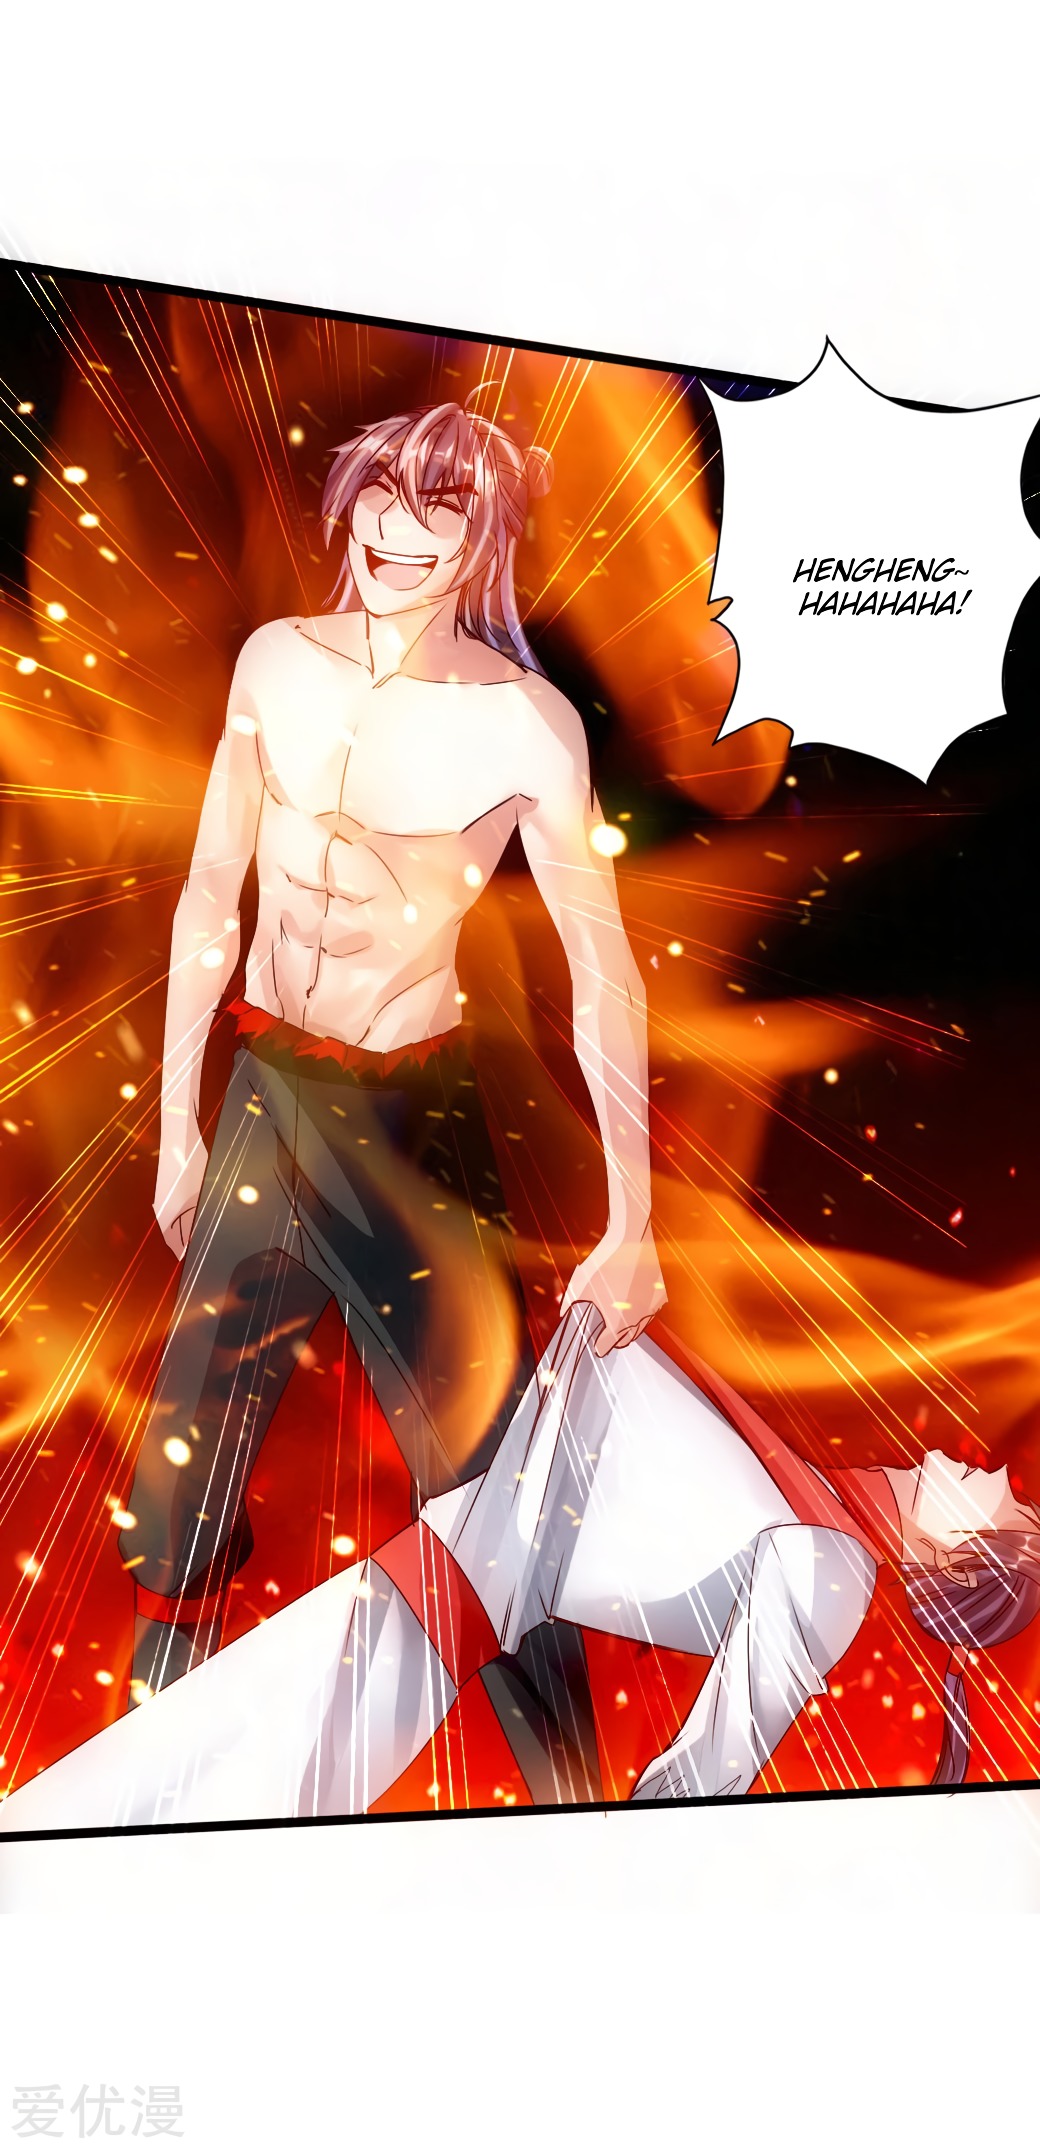 Banished Disciple's Counterattack ch.60